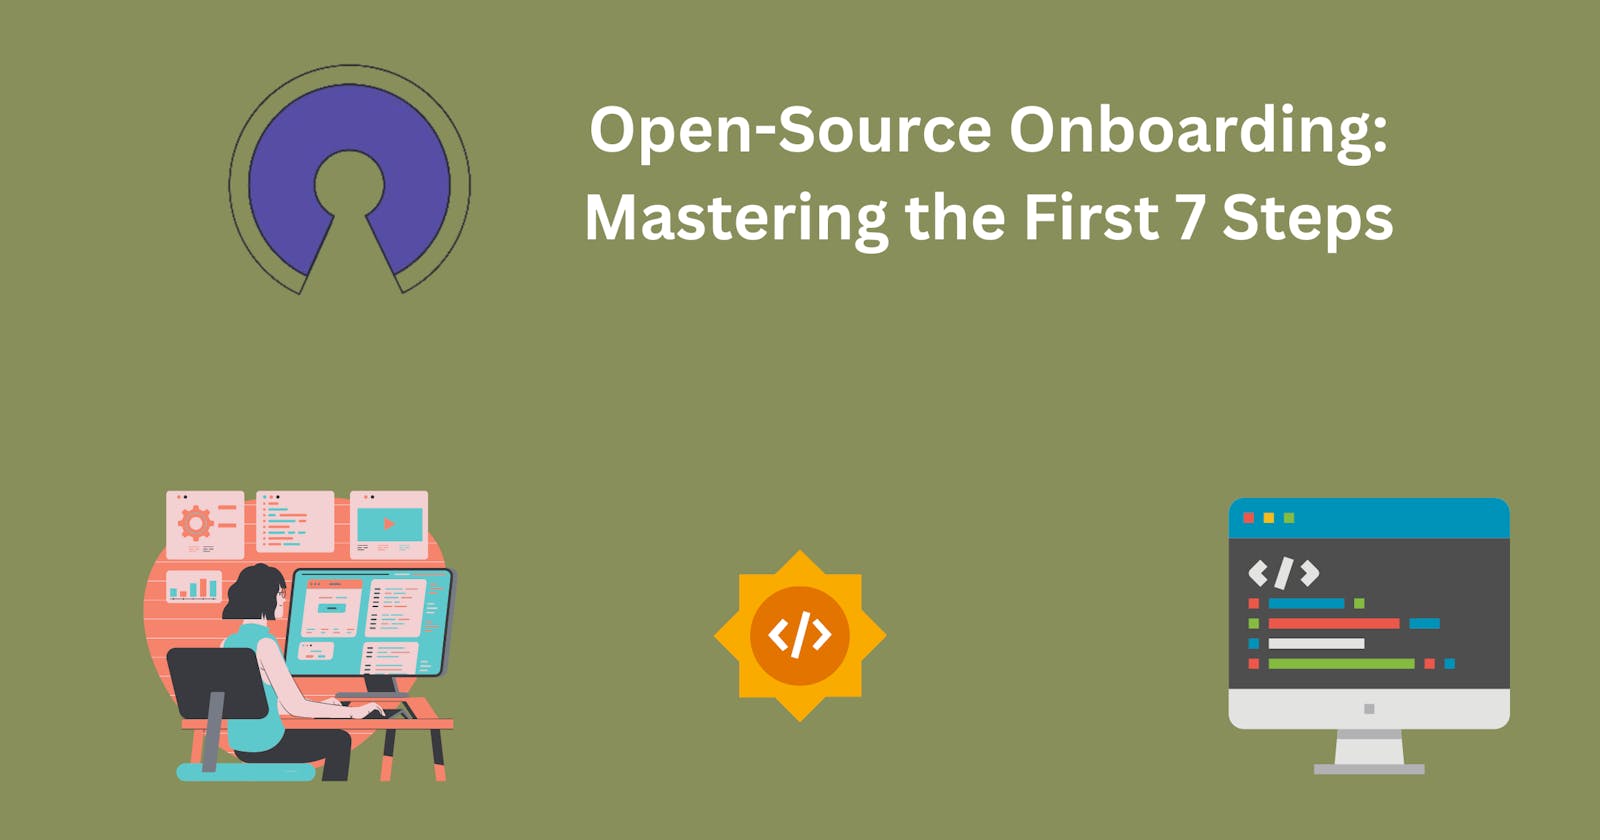 Open-Source Onboarding: Mastering the First 7 Steps